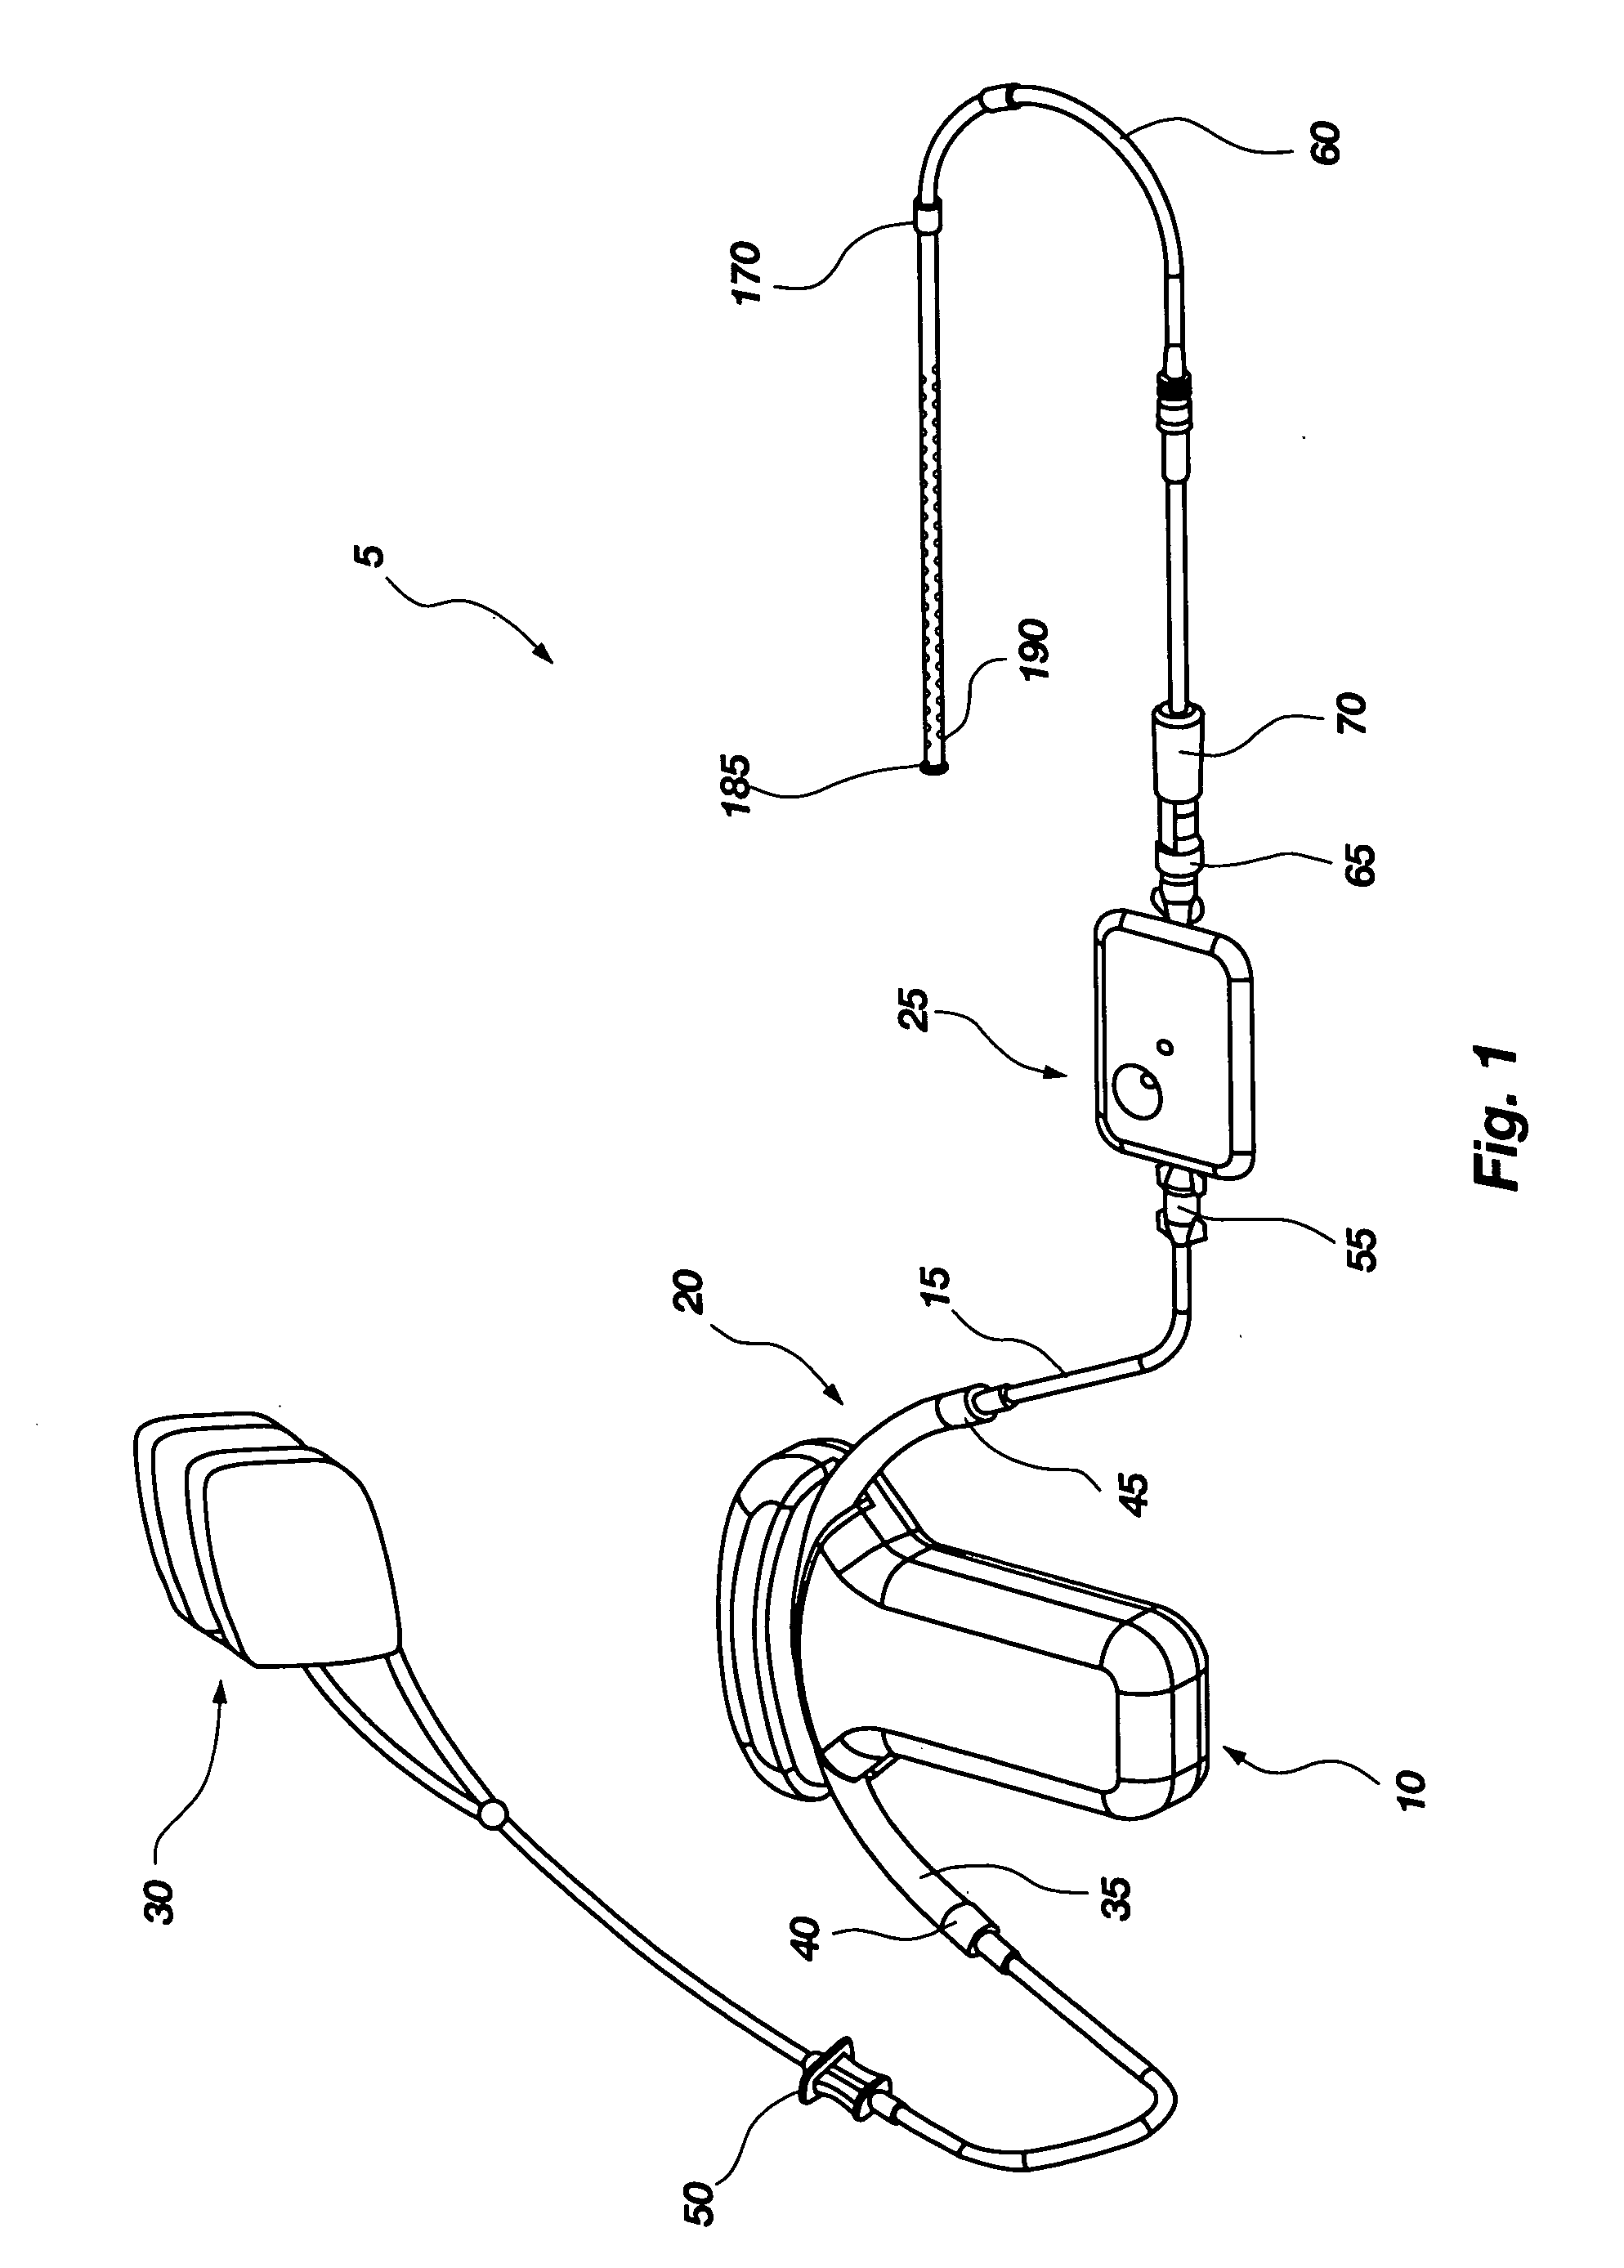 Apparatus and method for peritoneal dialysis